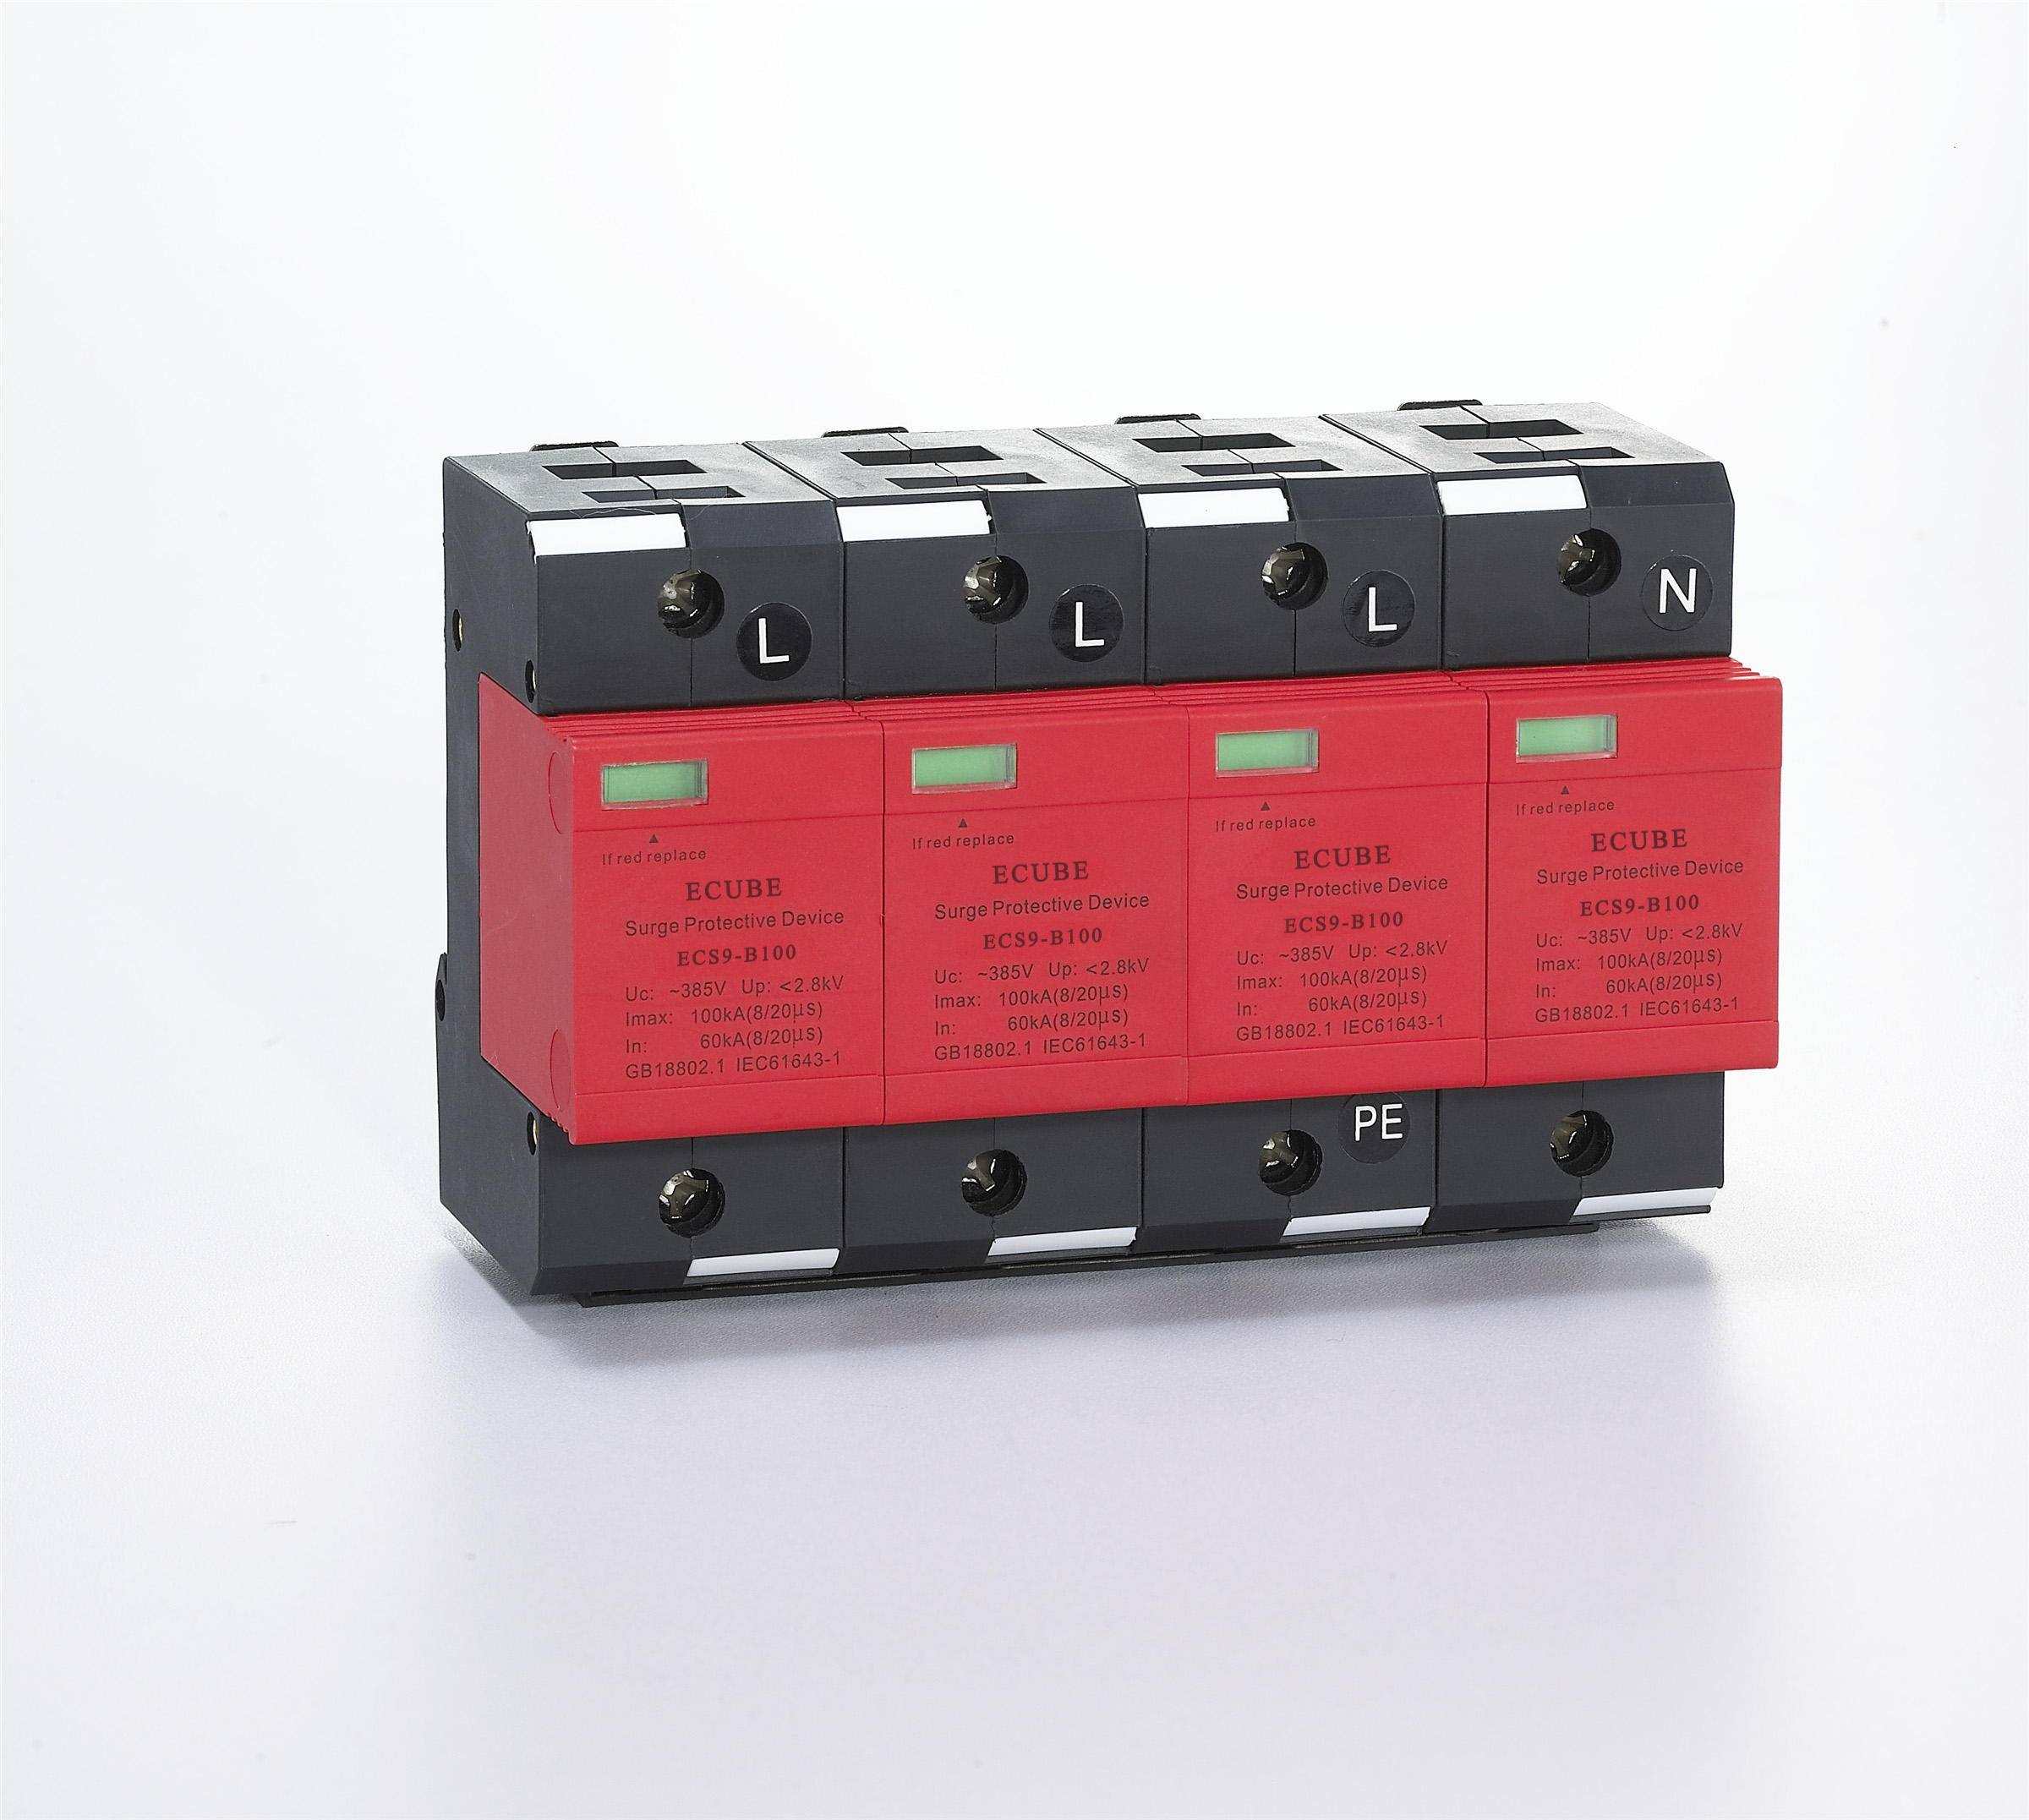 SPD Surge Protection Devices